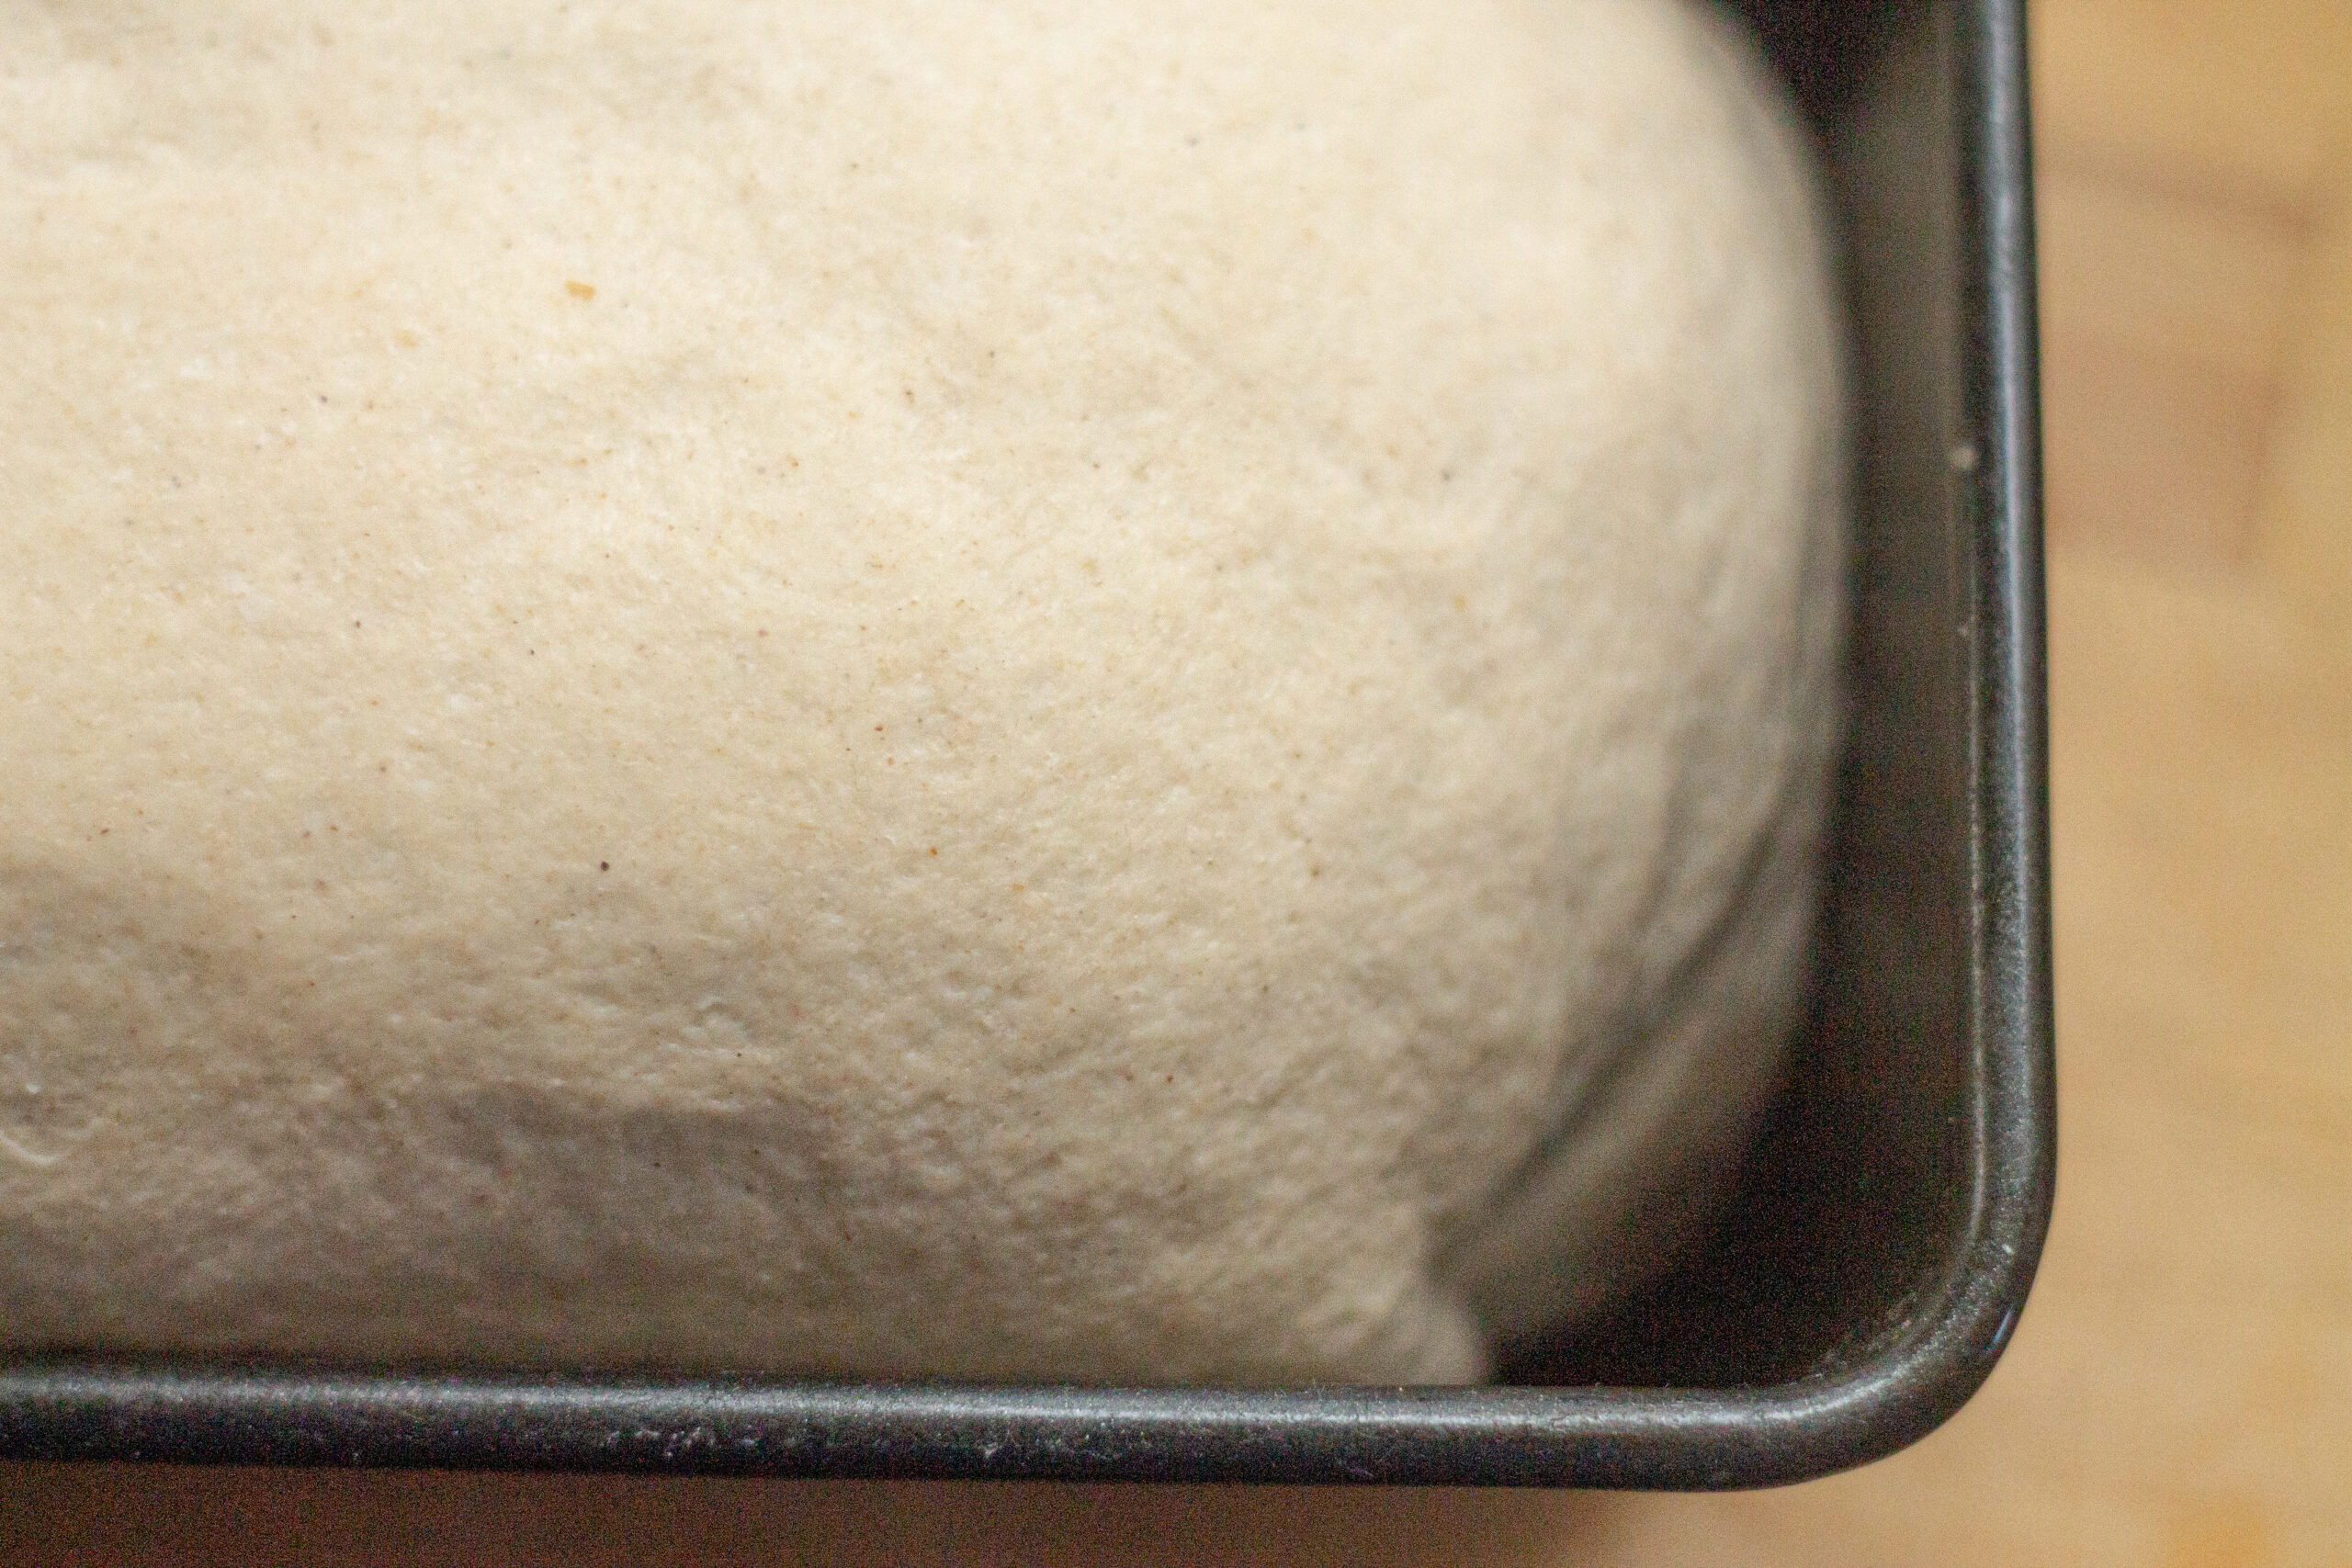 Shaping dough by tucking the edges under